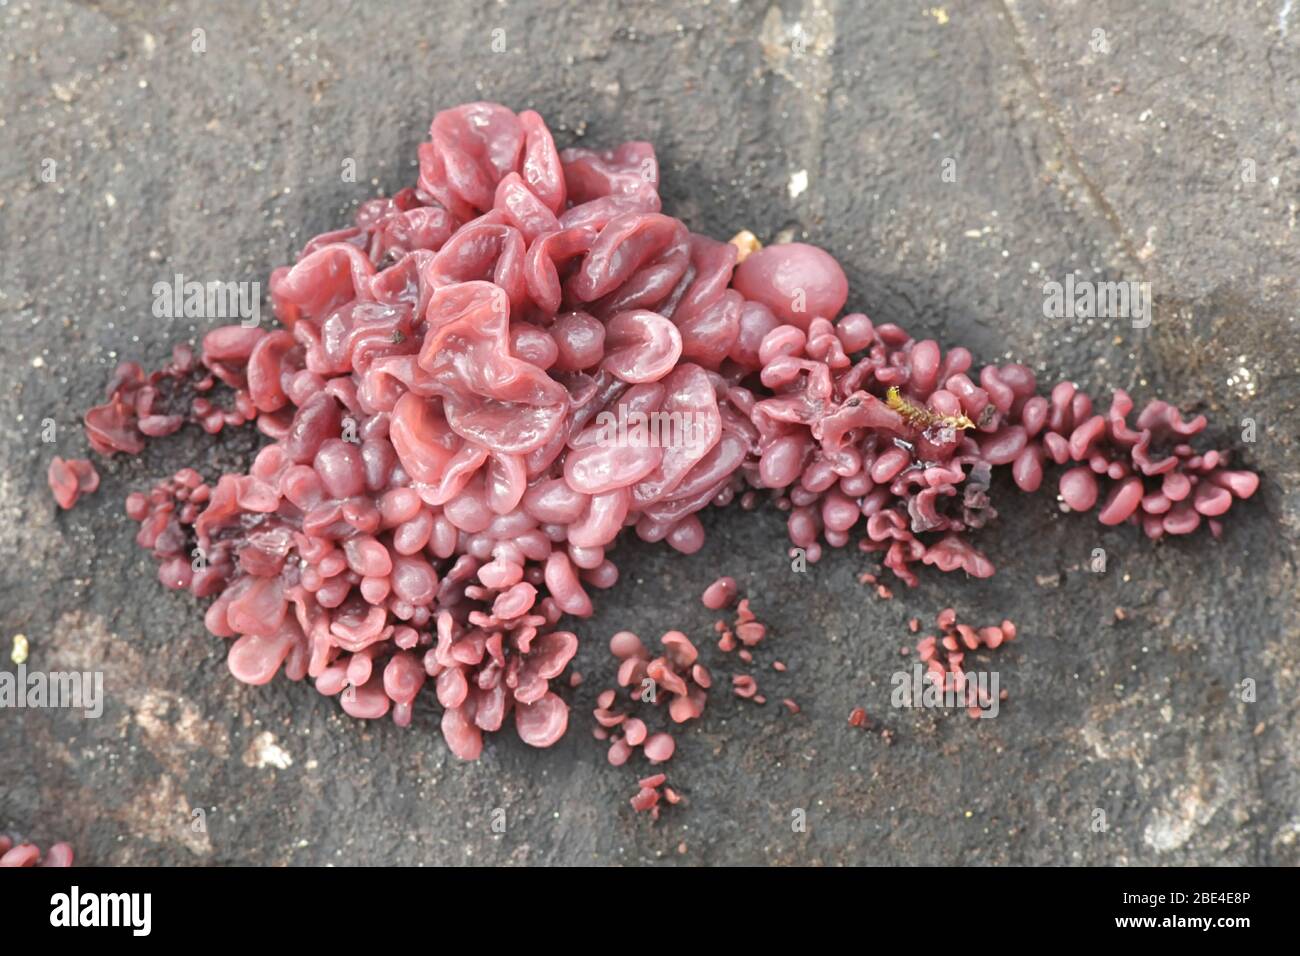 Ascocoryne sarcoides, known as the jelly drop or the purple jellydisc fungus, wild mushroom from Finland Stock Photo